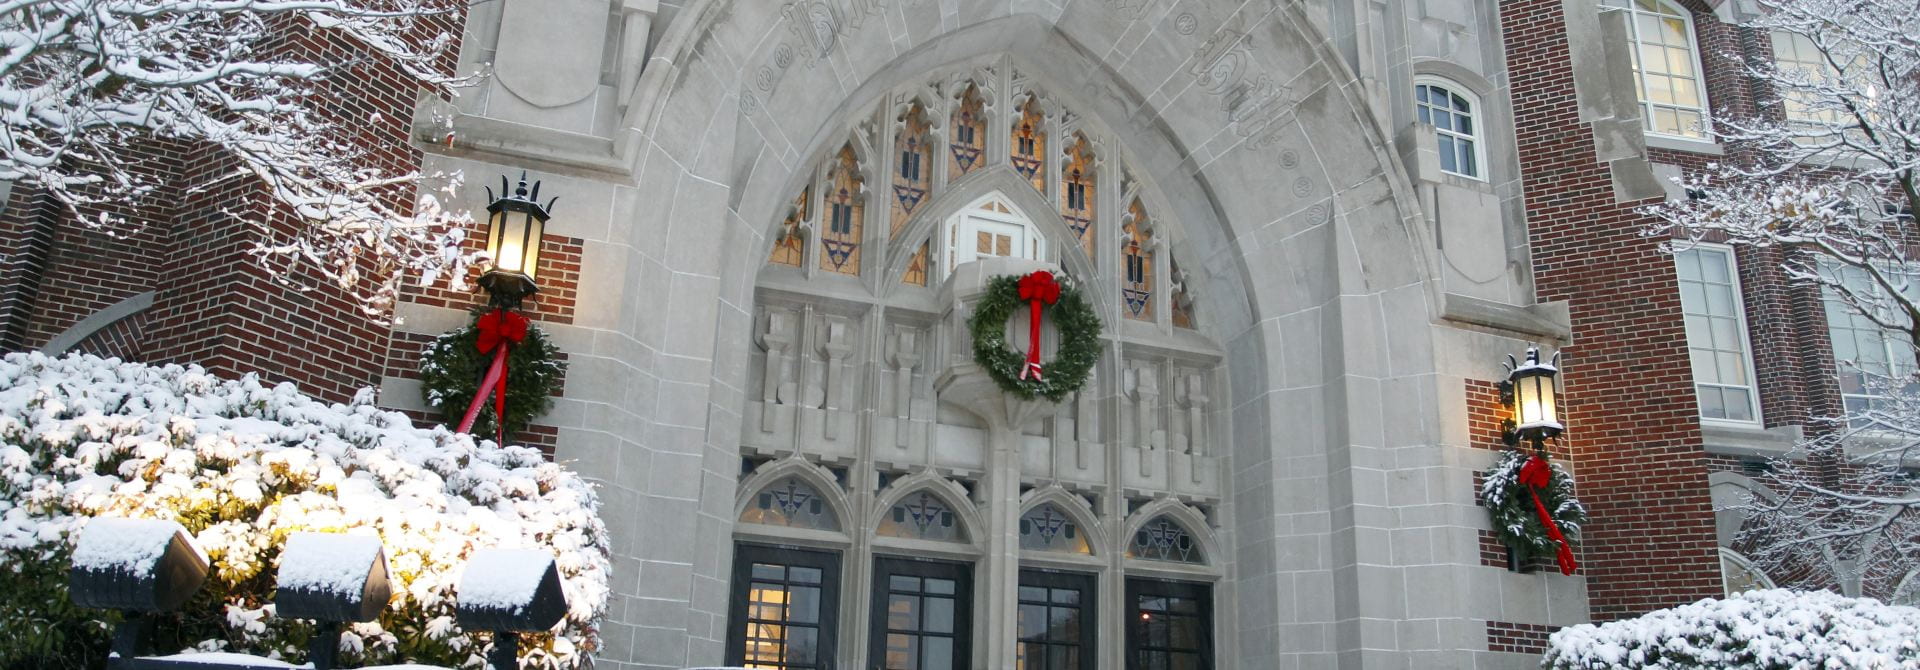 Harkins Hall, Stone and Brick Building, with Three Wreaths and Red Bows on the Front.